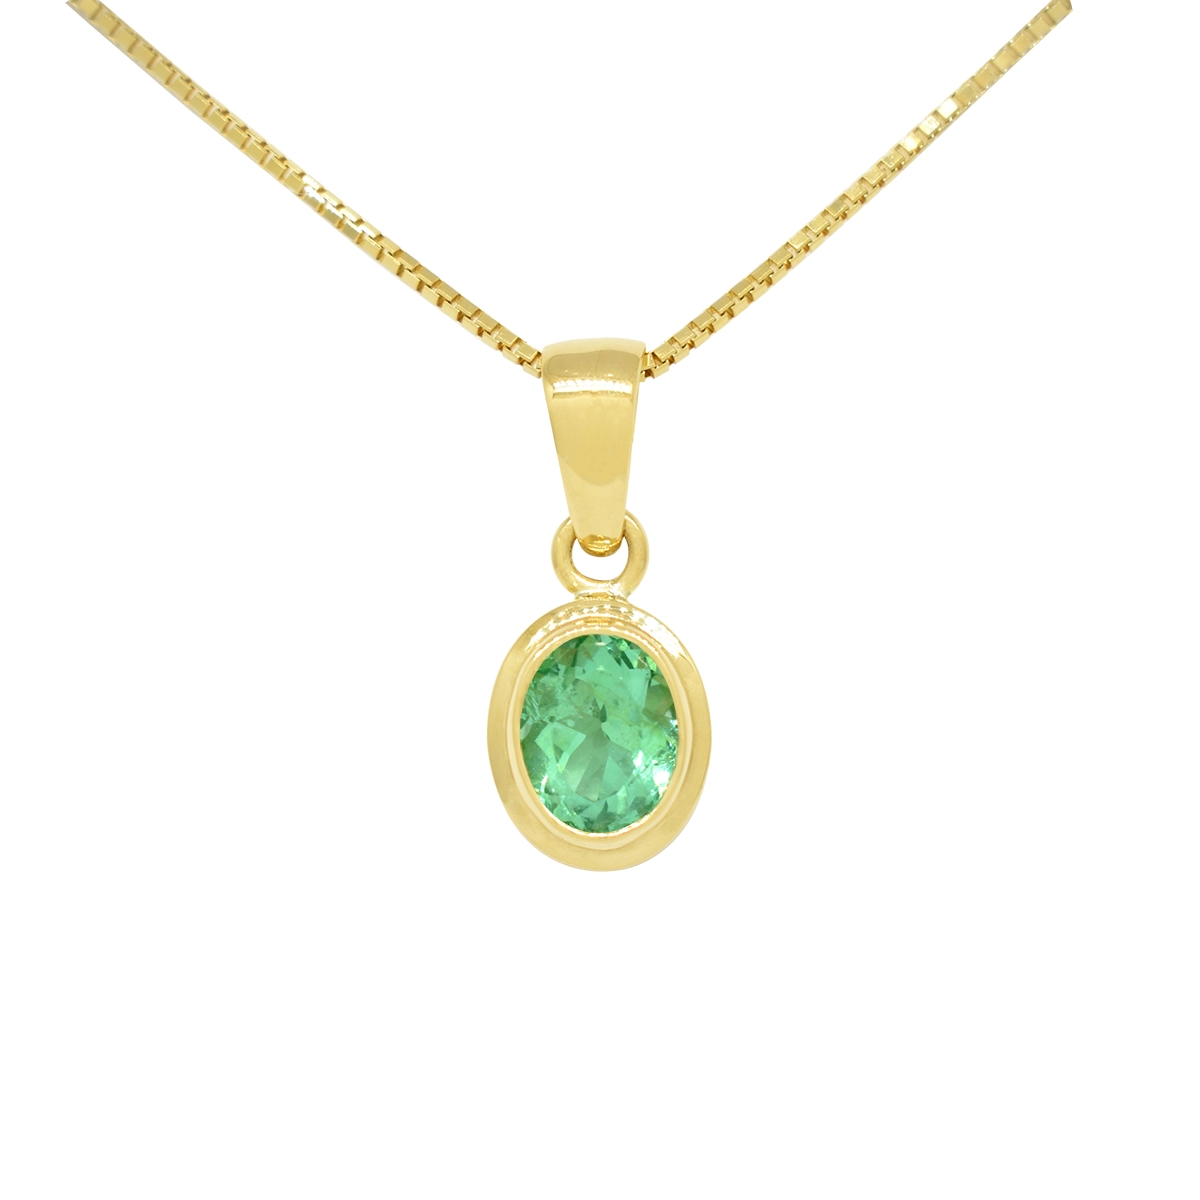 Emerald pendant necklace in 18K yellow gold with 0.90 Ct. oval shape natural emerald in classic bezel setting